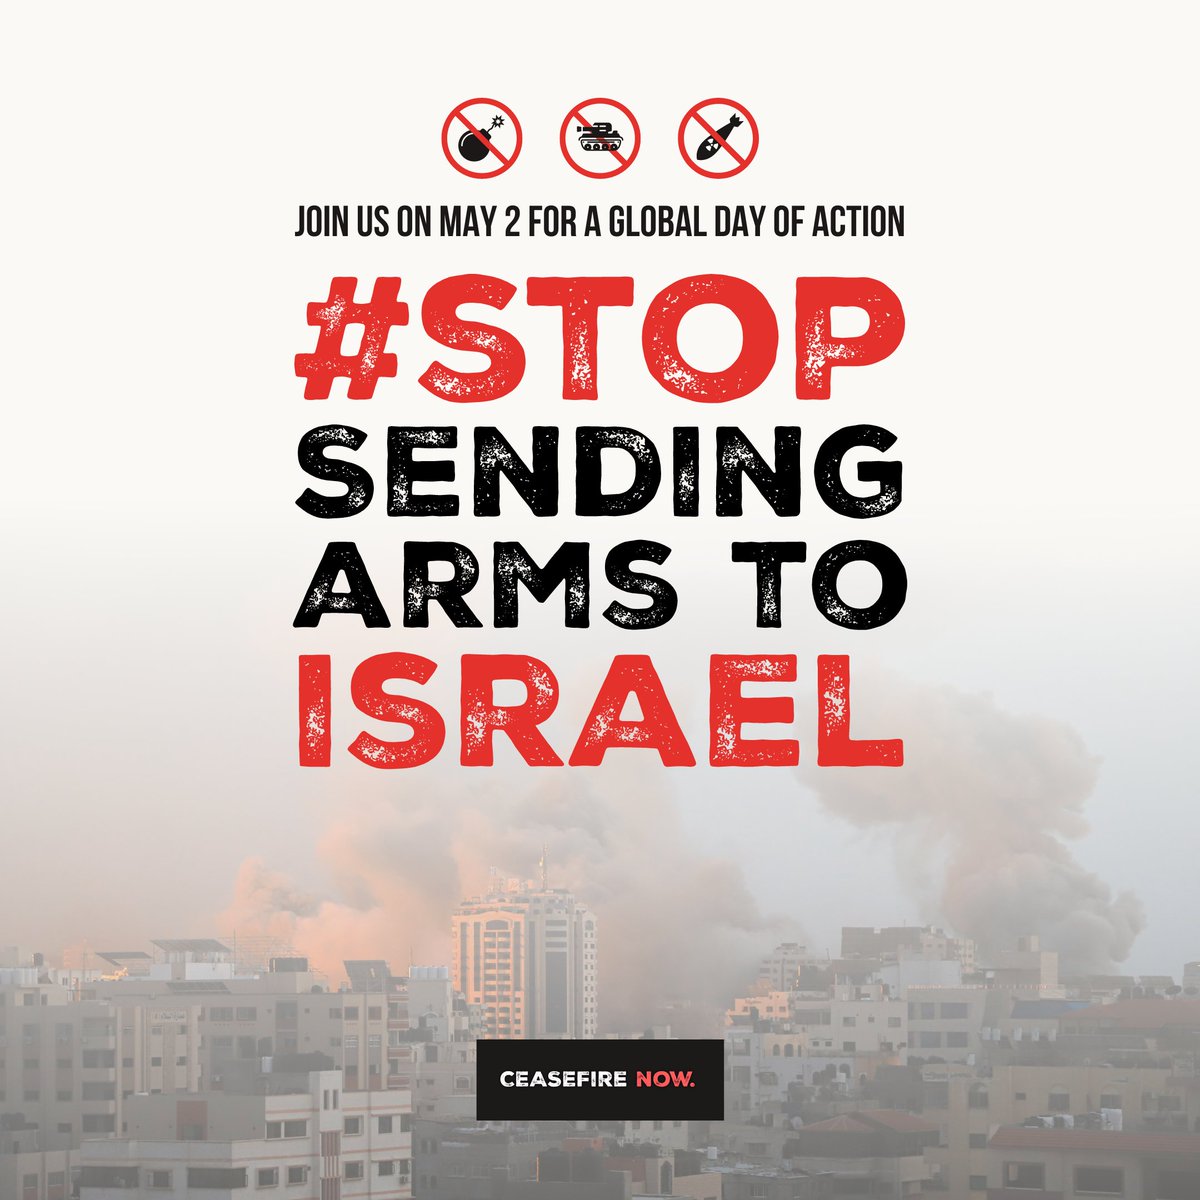 🚨❗️🆘 More than 34,000 Palestinians have been killed in the past six months. #StopSendingArms to Israel or risk complicity in committing war crimes and genocide! #CeasefireNOW